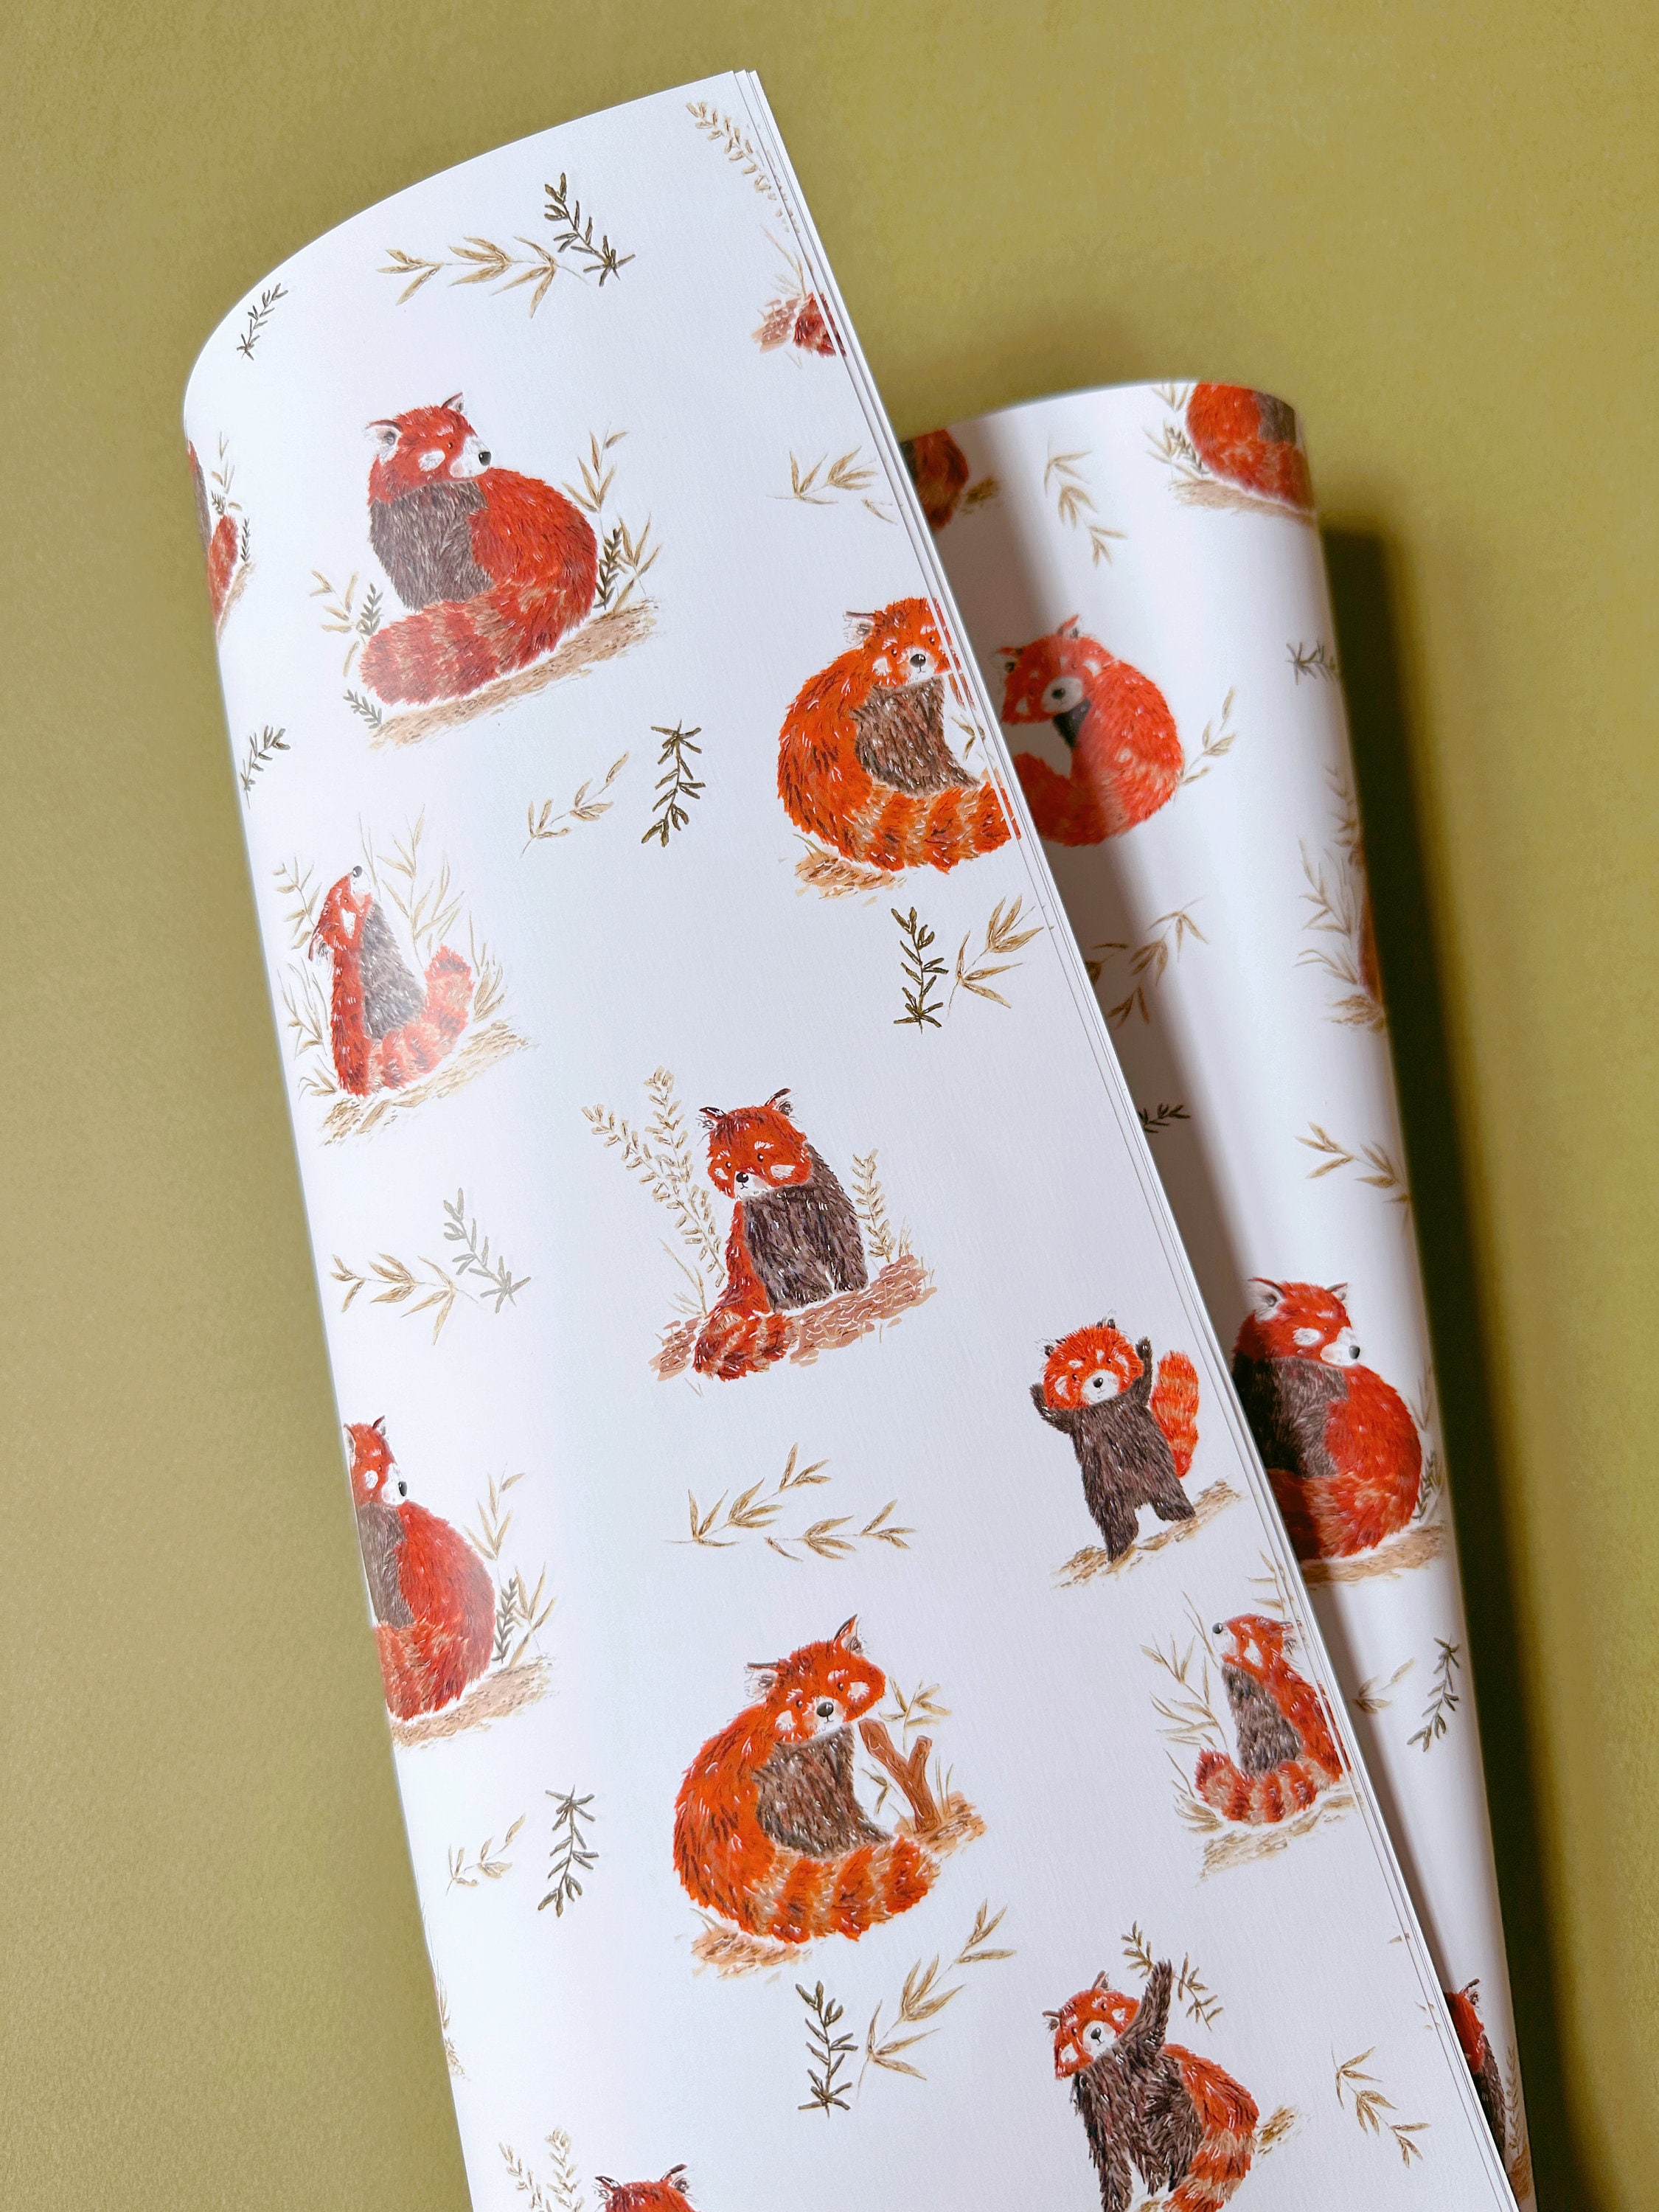 2PCS New Tabletop Wrap Portable Gift Wrapping Tool Paper Roll